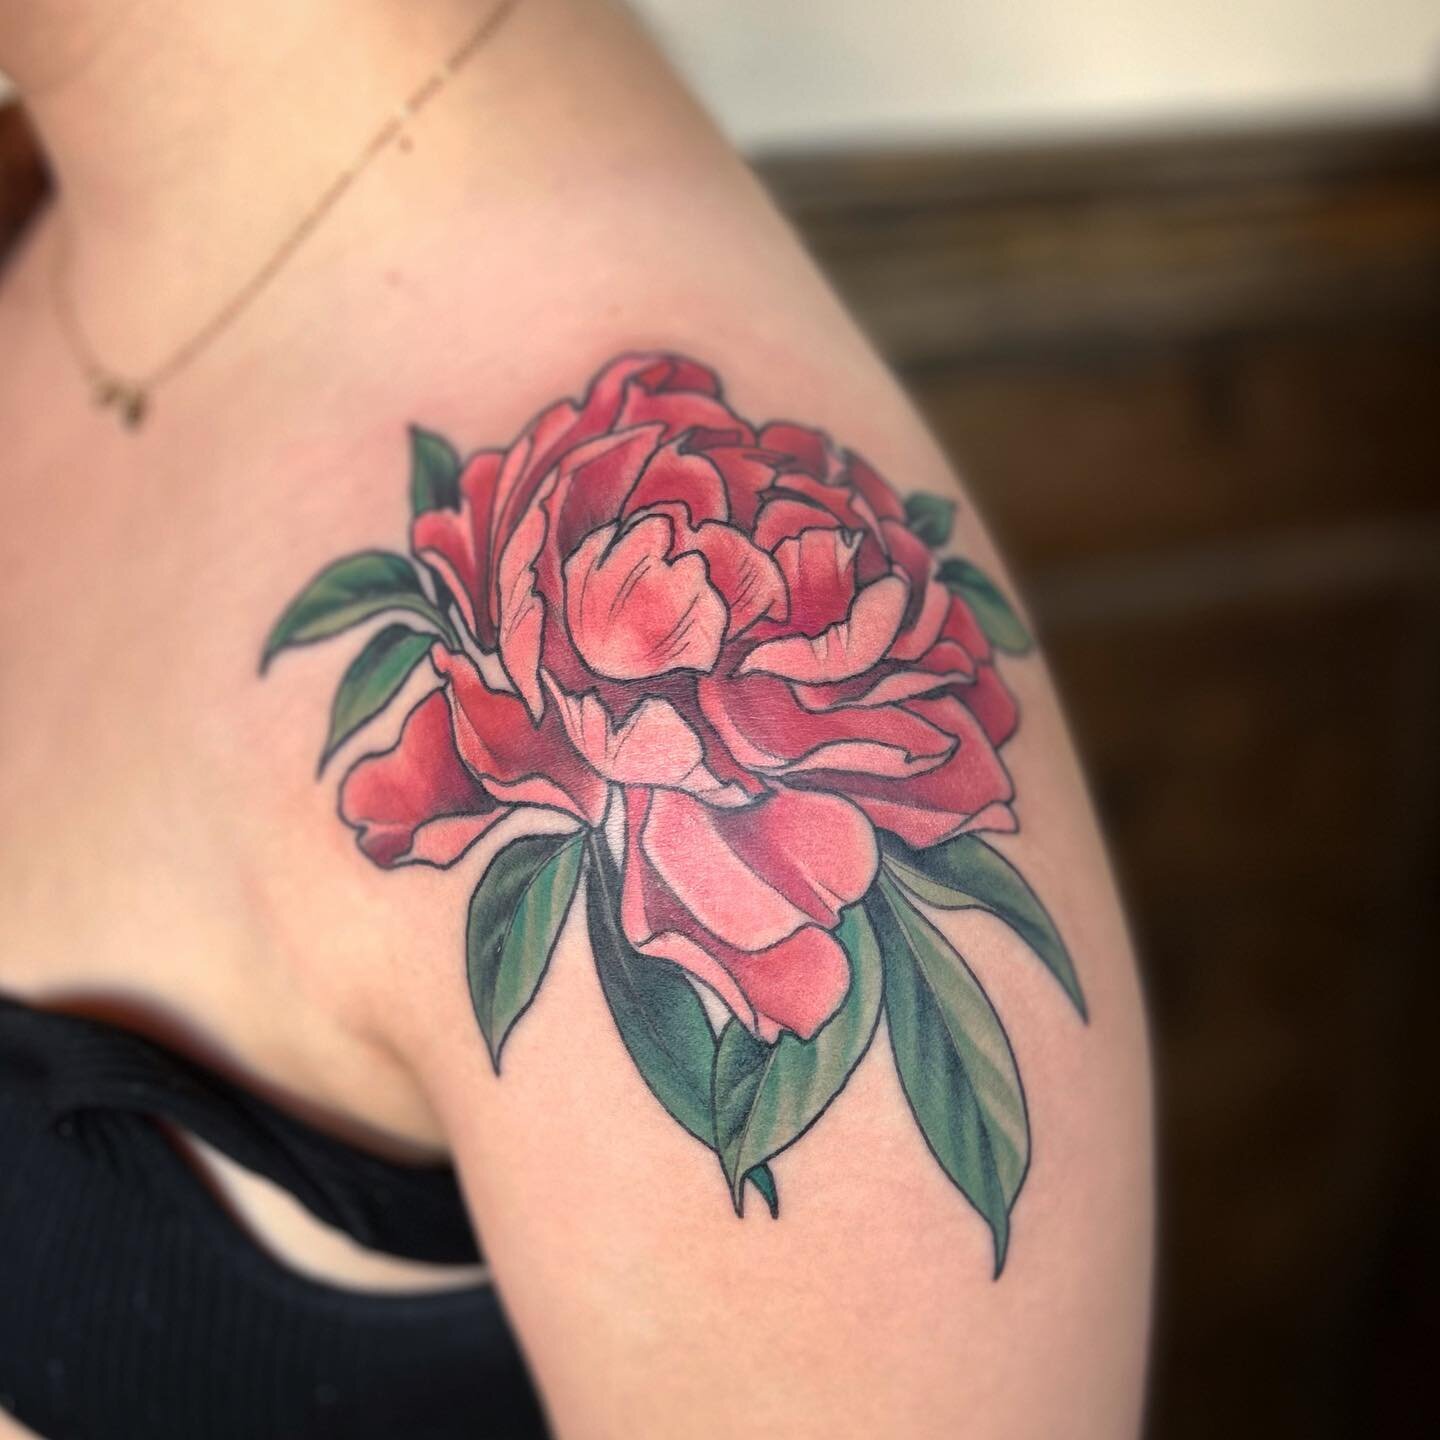 Love a simple bloom all on its own- so impactful! Thanks so much Megan 🌸
*
Made @houndstoothtattoo 
*
#tattoo #peonytattoo #flowertattoo #floraltattoo #botanicaltattoo #botanicalillustration #botanicalart #illustrativetattoo #naturetattoo #natureill